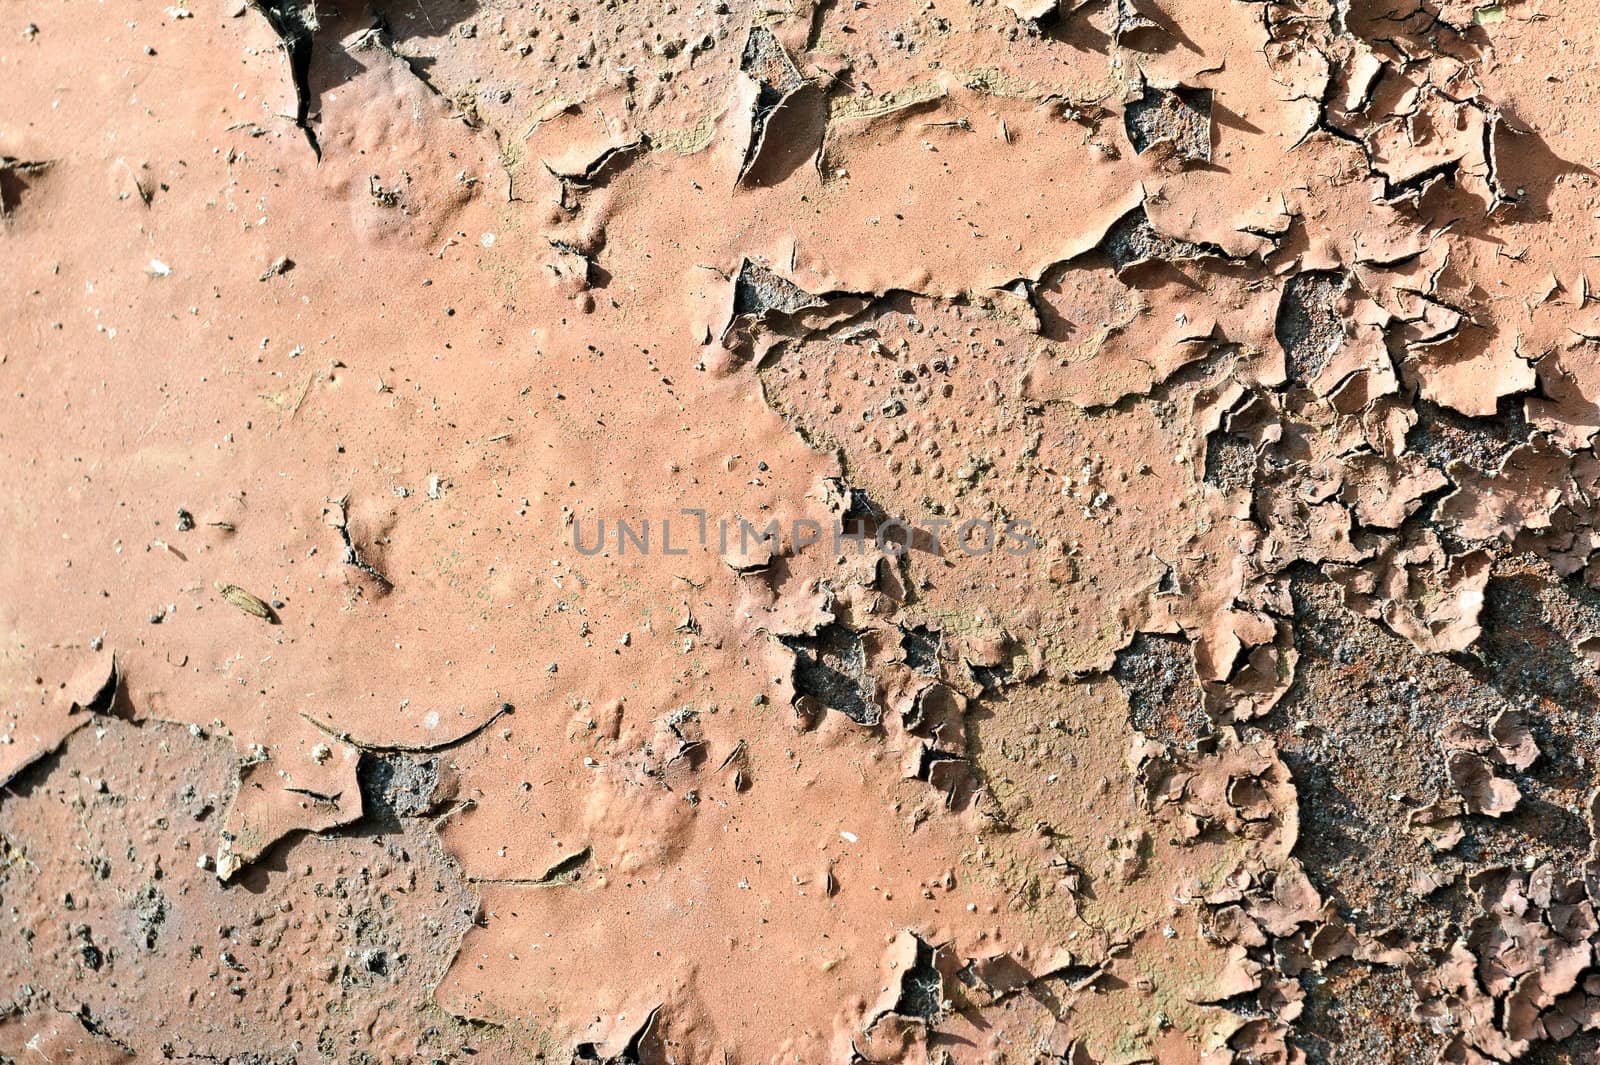 Rusty grunge surface with cracked paint
